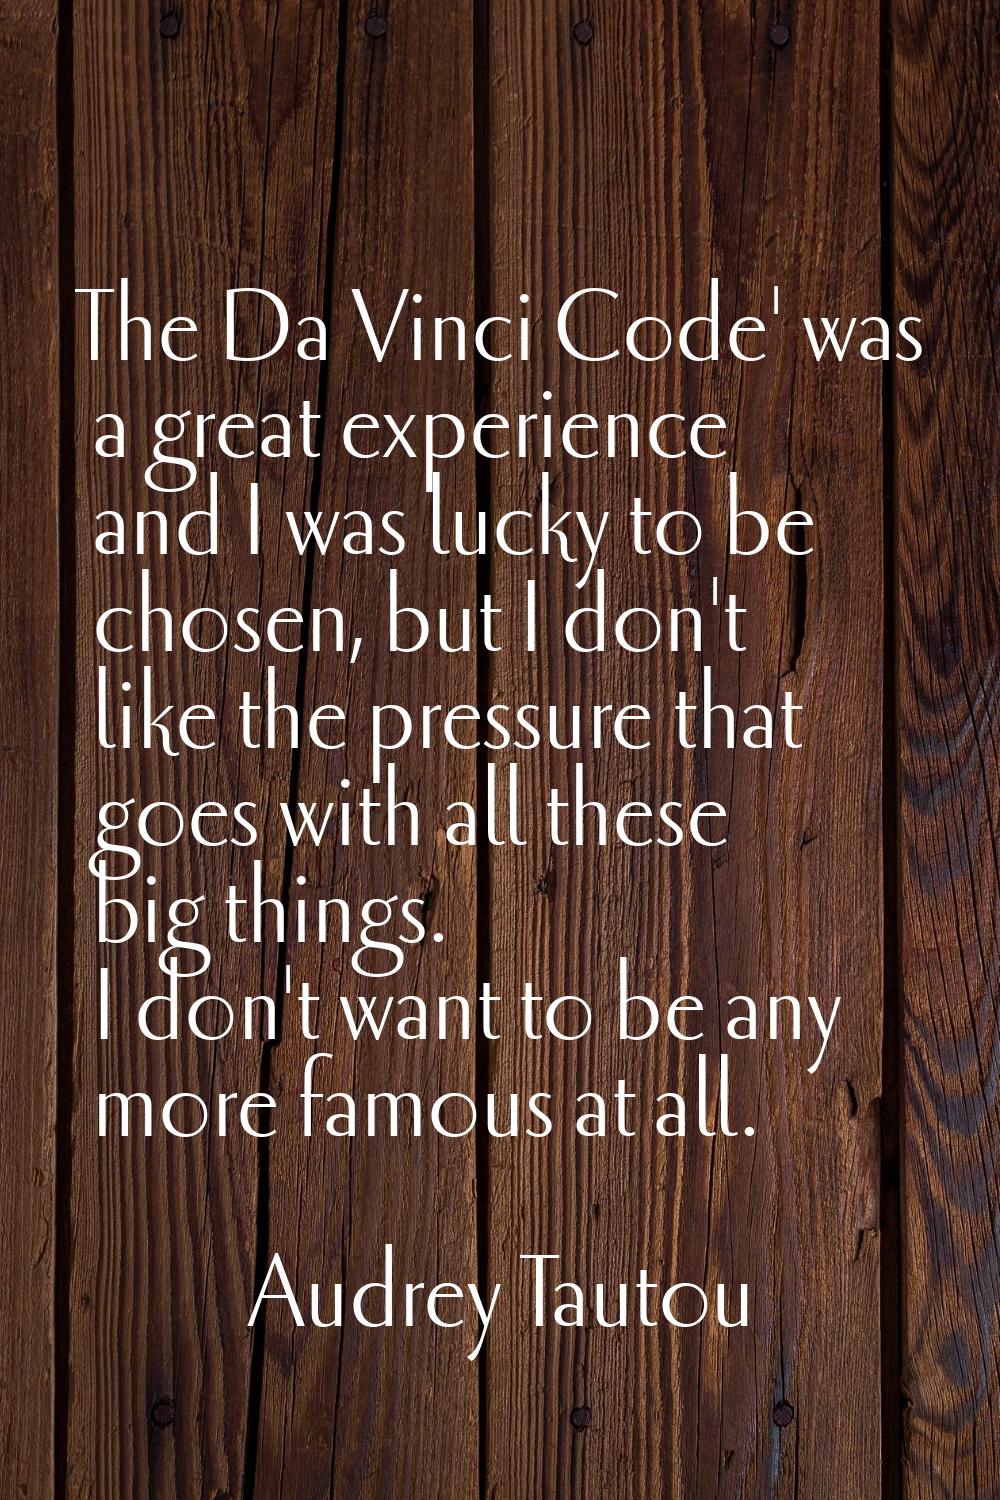 The Da Vinci Code' was a great experience and I was lucky to be chosen, but I don't like the pressu